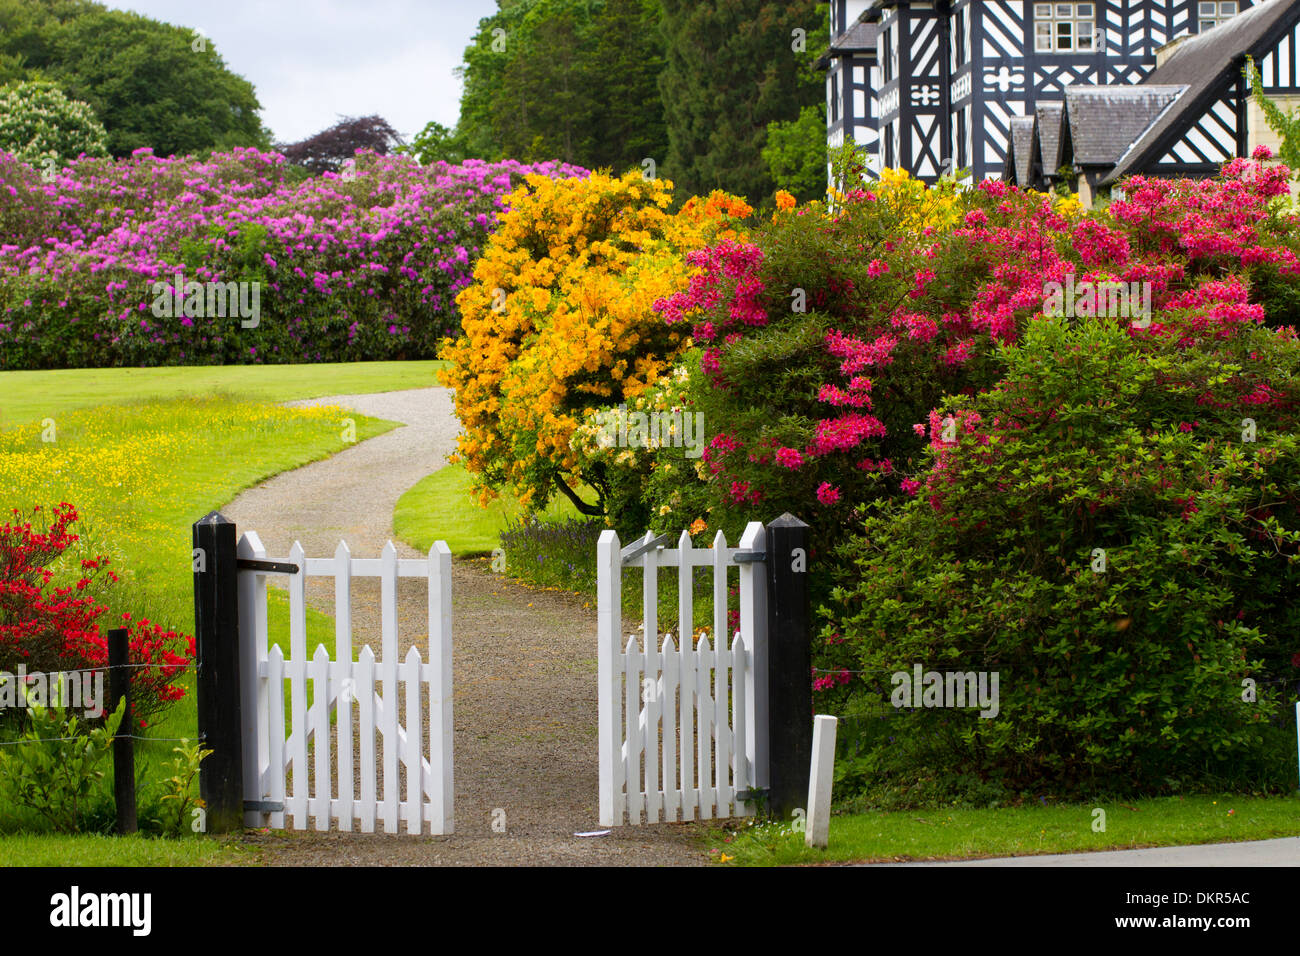 Cultivated hybrids of Azaleas and Rhododendrons flowering in a garden. Gregynog, Powys, Wales. June. Stock Photo